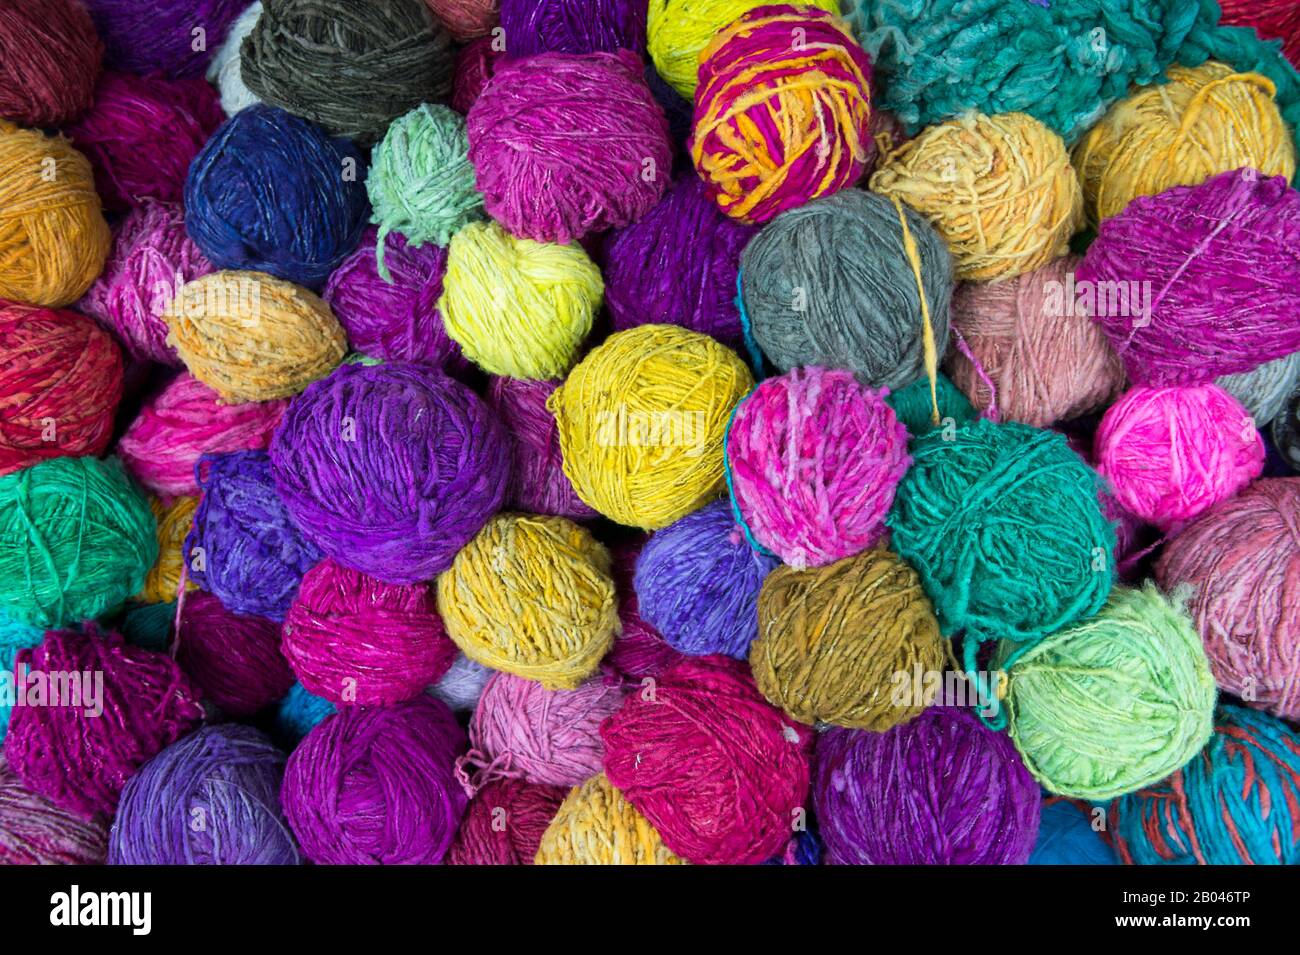 Street scene with colorful wool in Angelmo, Puerto Montt in southern Chile. Stock Photo